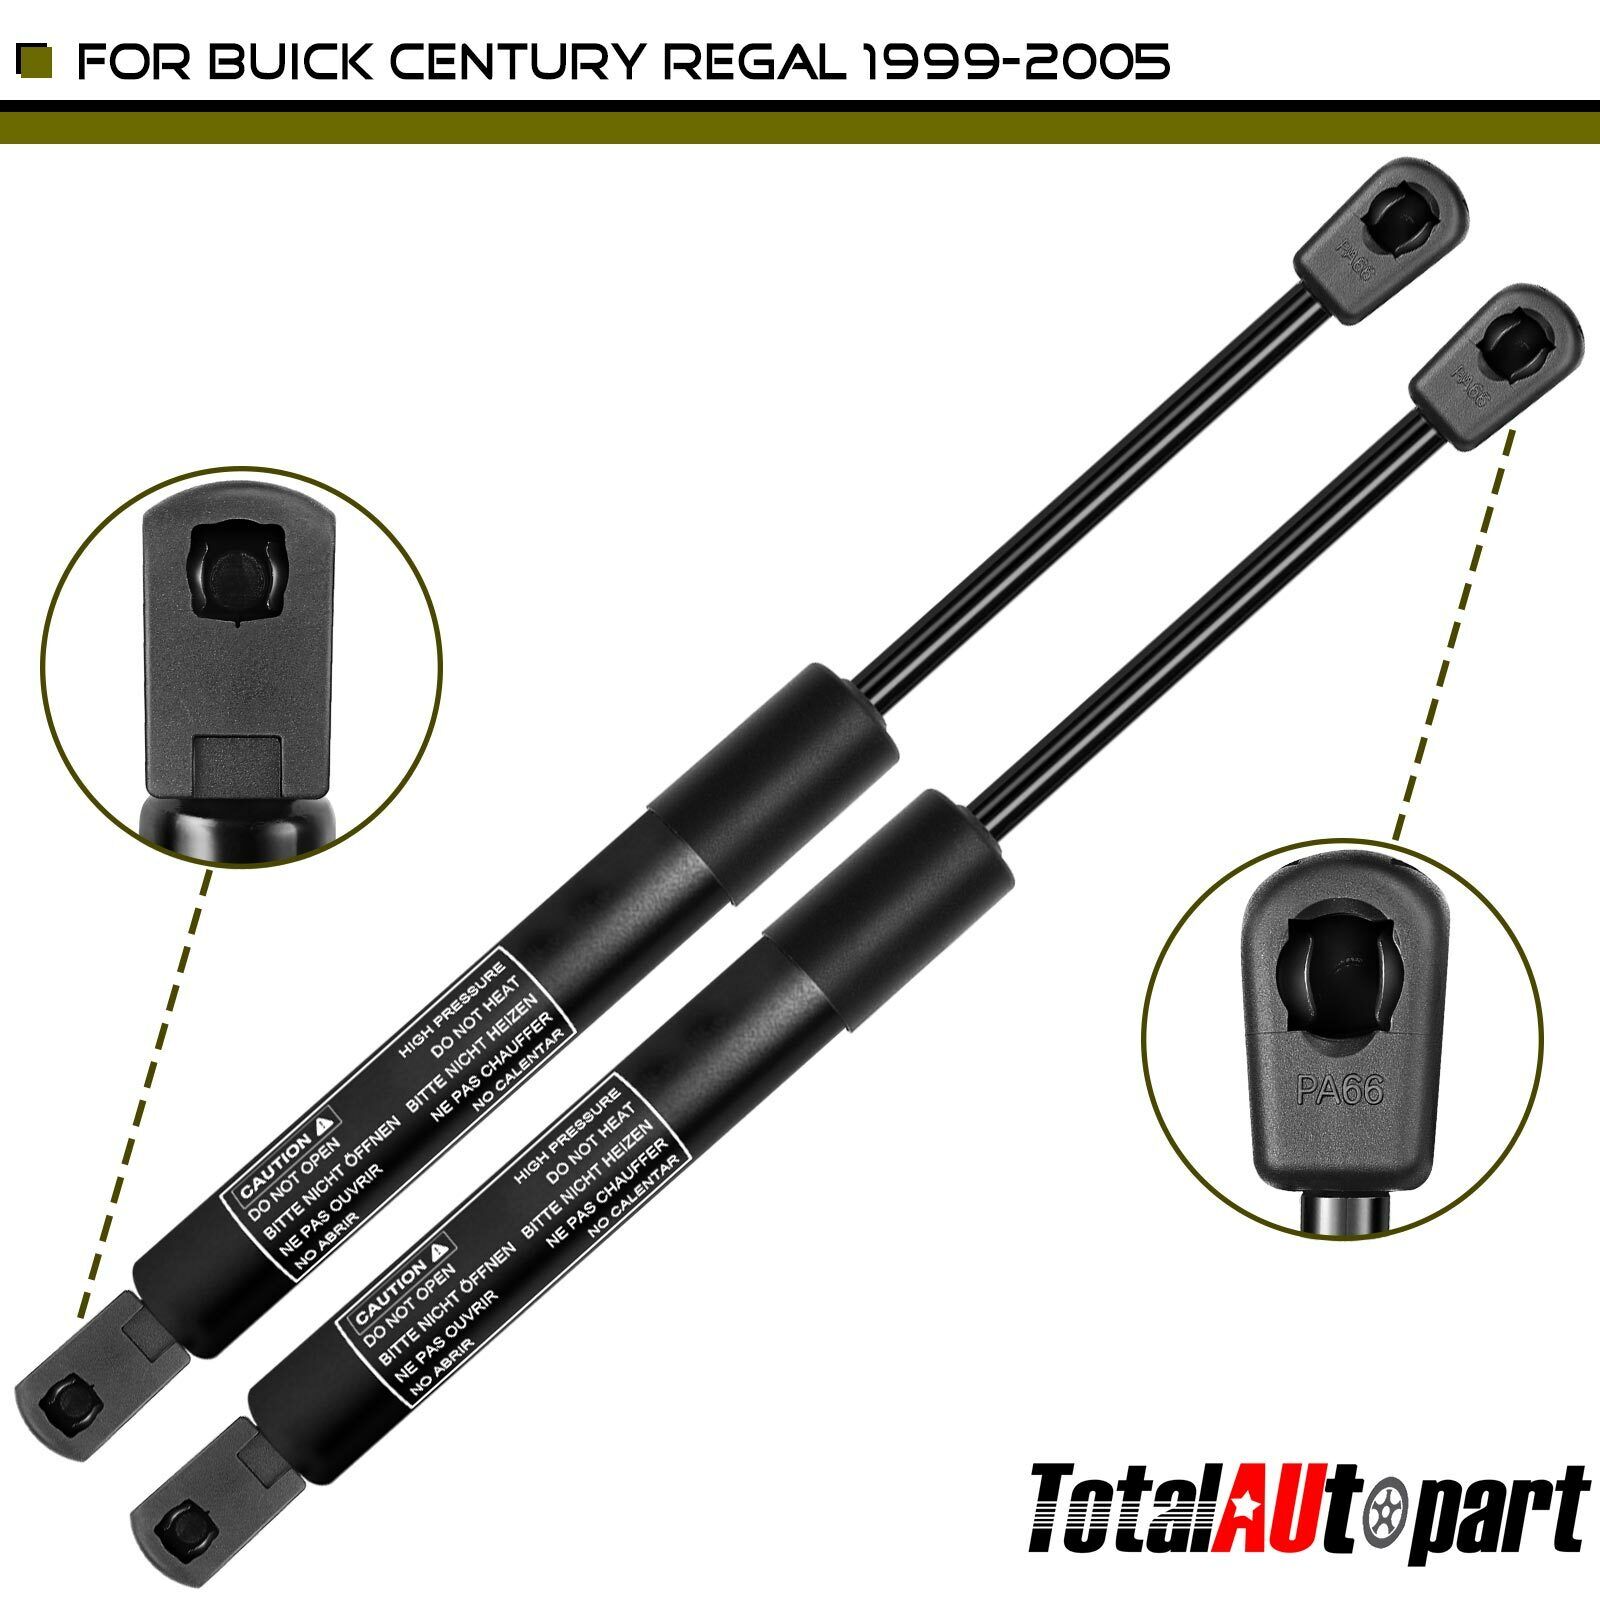 New 2x Trunk Lift Supports Shock Struts for Buick Century 1999-2005 Regal 99-04